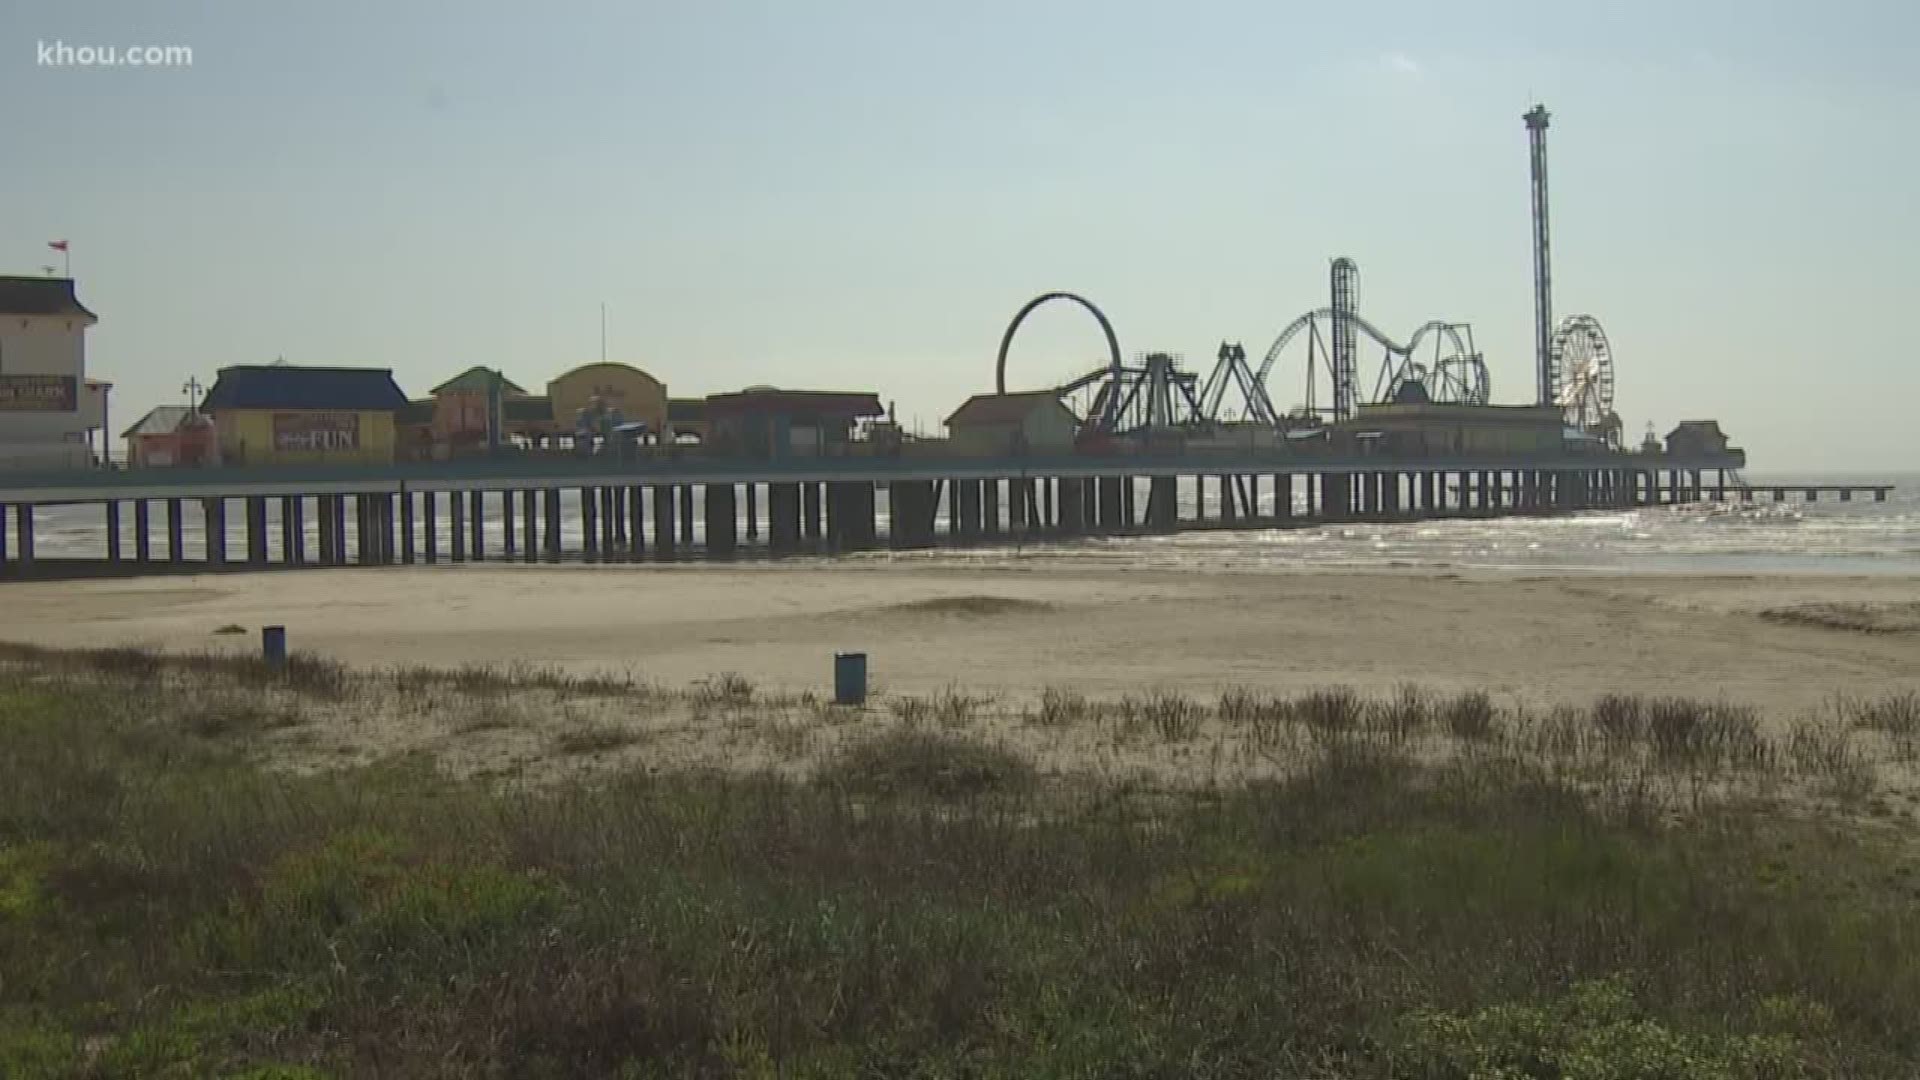 Some Galveston Island hotels already have occupancy rates in the single digits